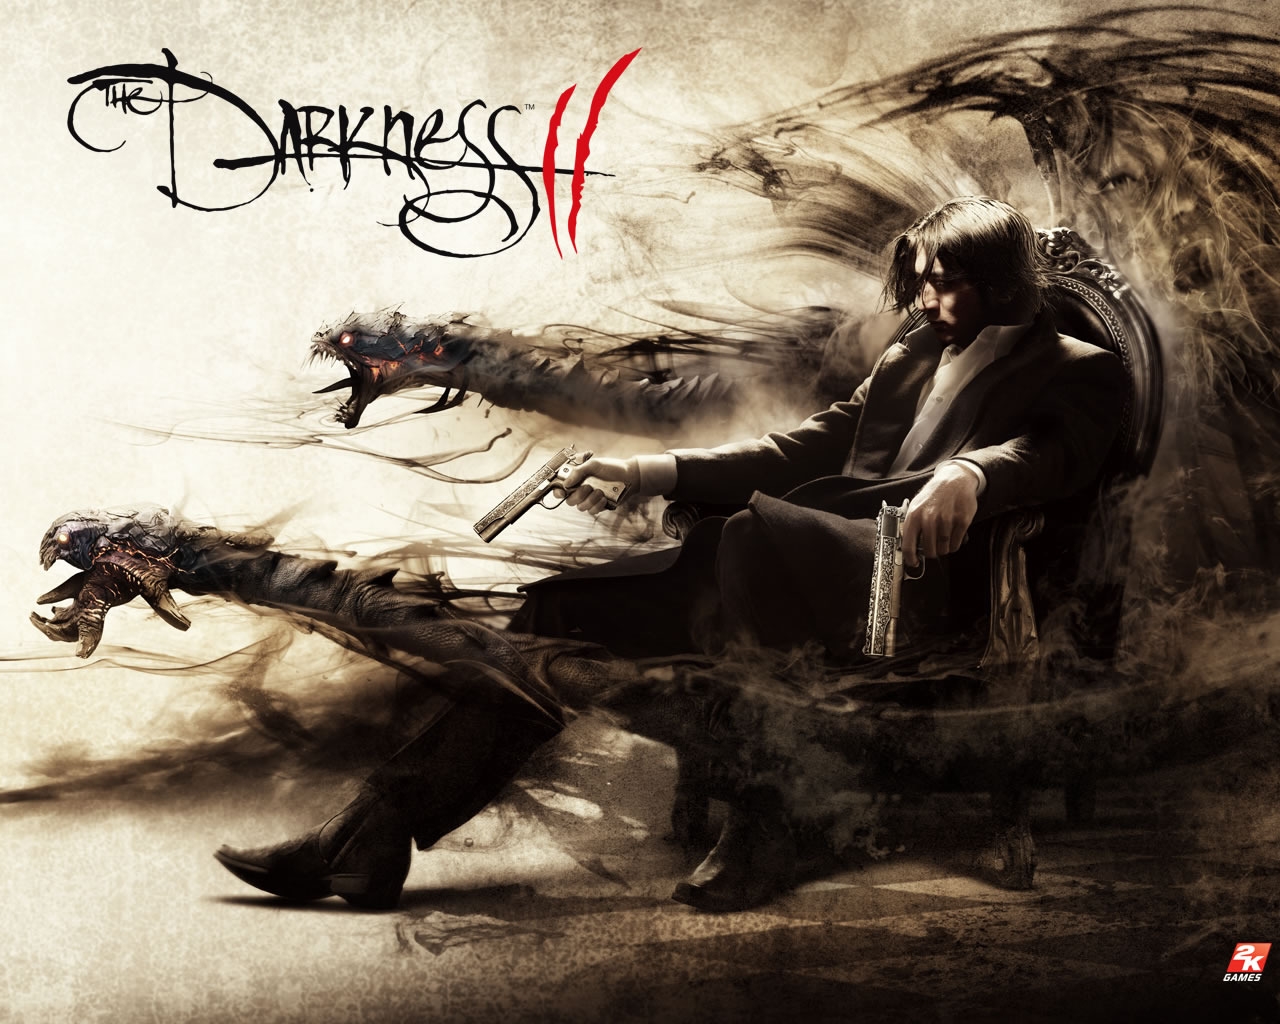 The Darkness II for 1280 x 1024 resolution